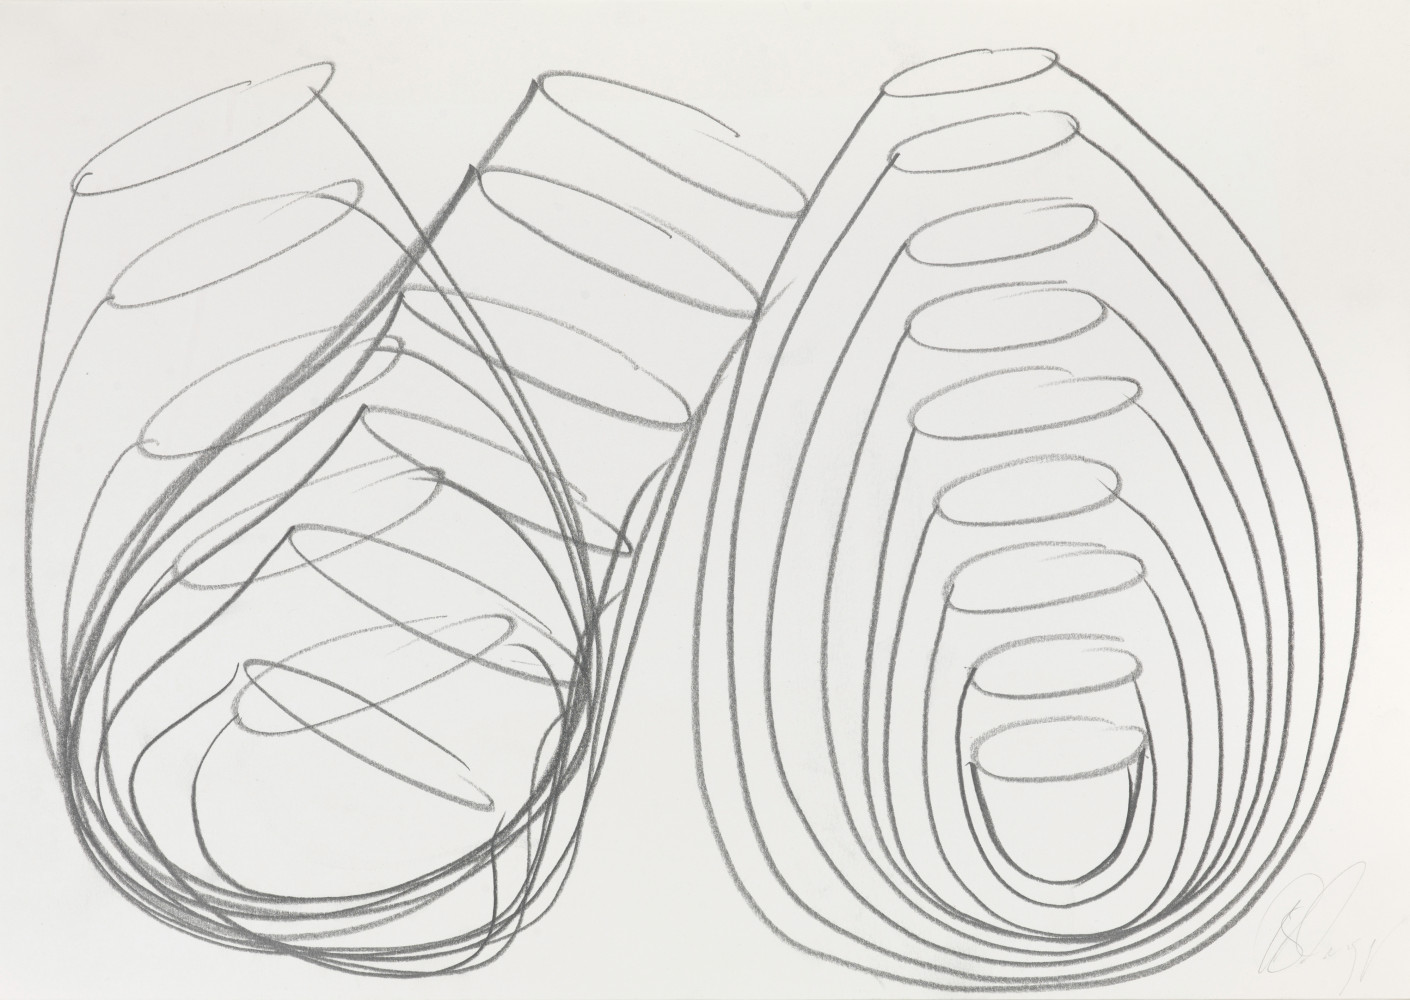 Tony Cragg, ‘Untitled (#1237)’, 1992, Pencil on paper